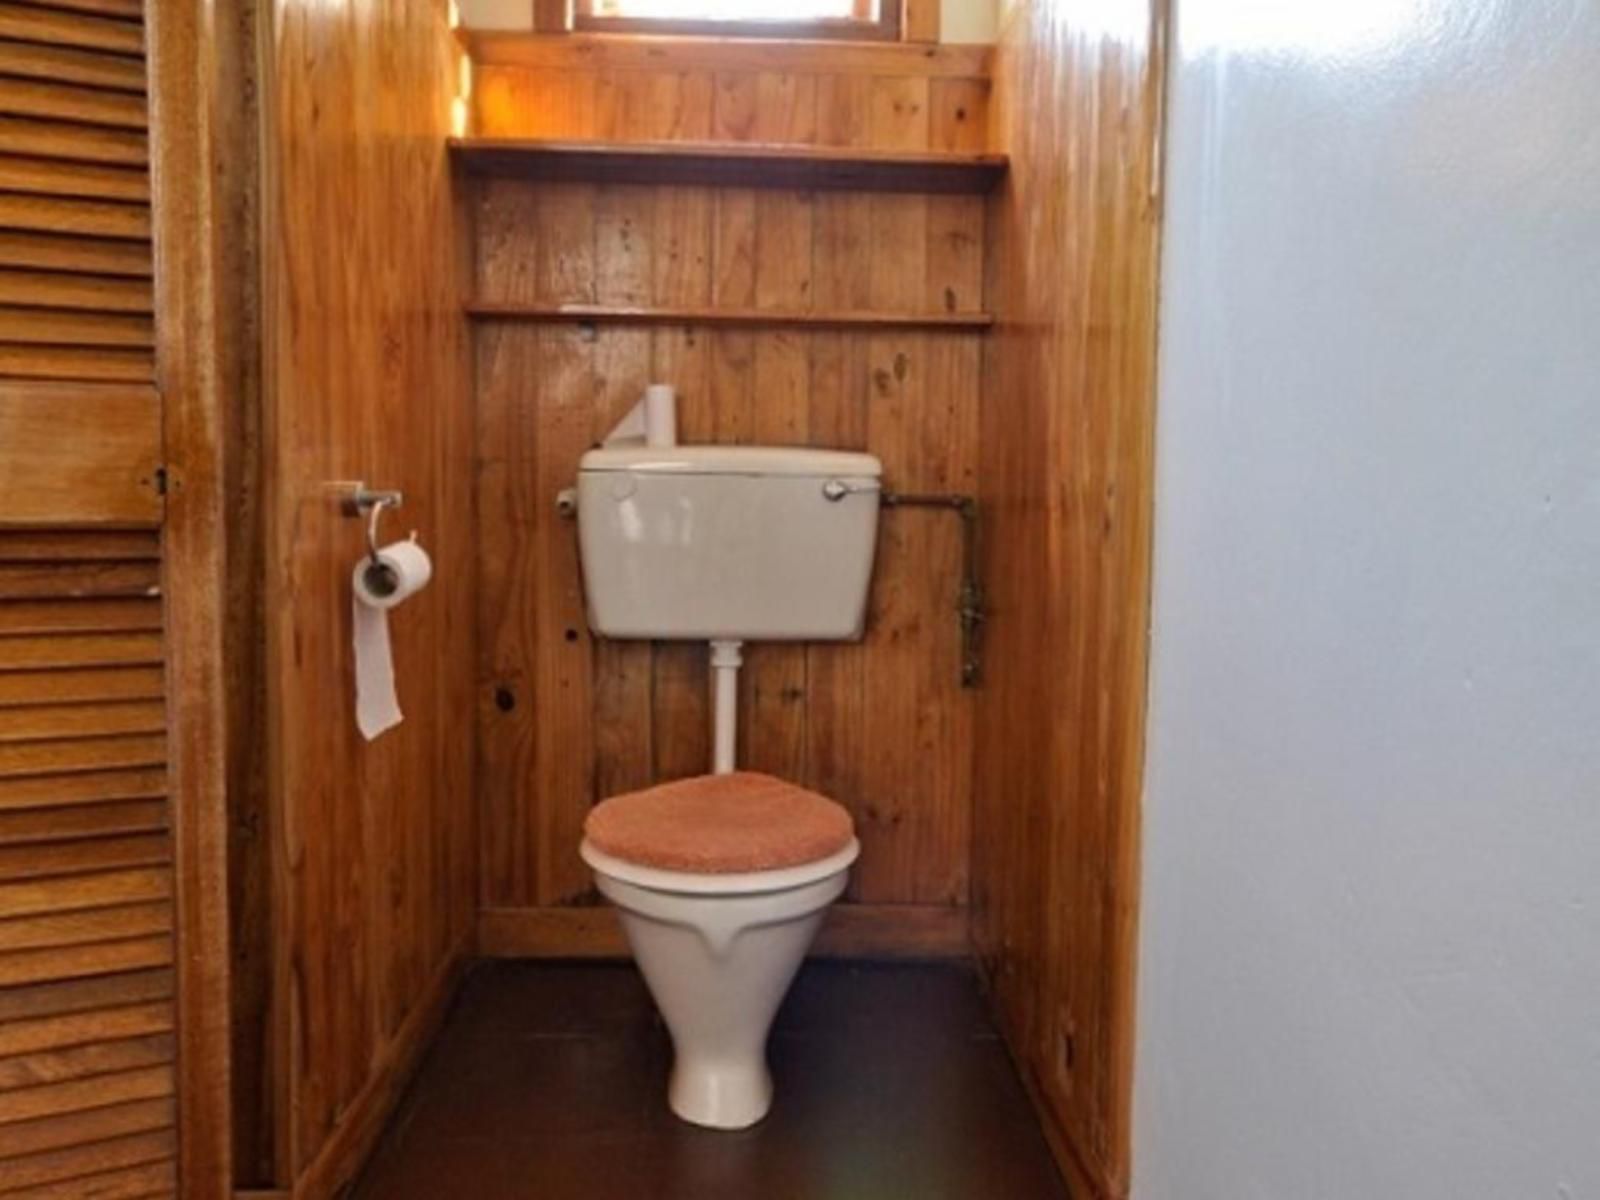 North Lodge Cottages Self Catering Park Hill Durban Kwazulu Natal South Africa Bathroom